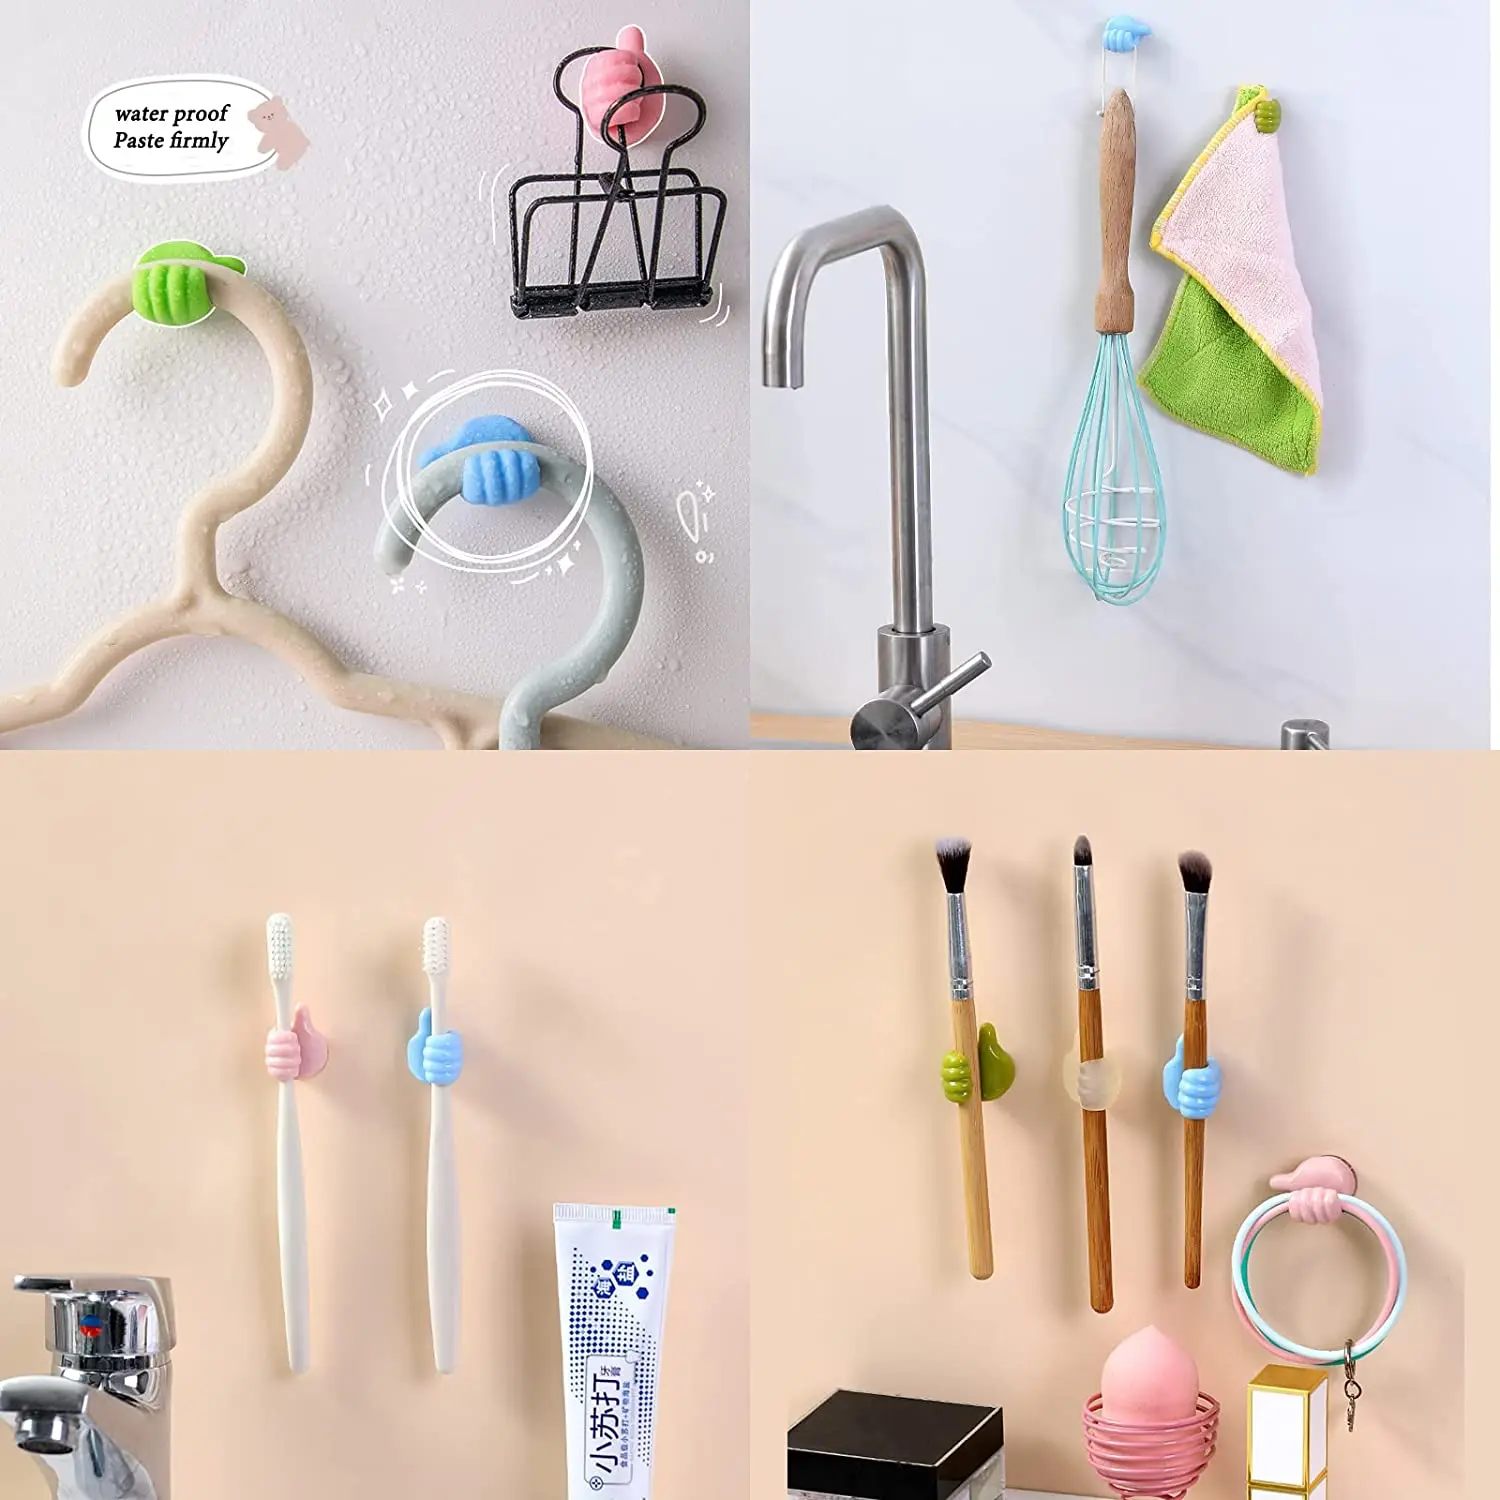 Silicone Thumb Wall Hook - Multifunction Adhesive Cable Clip Self Adhesive Thumb Cable Organizer Clips Key Hanger